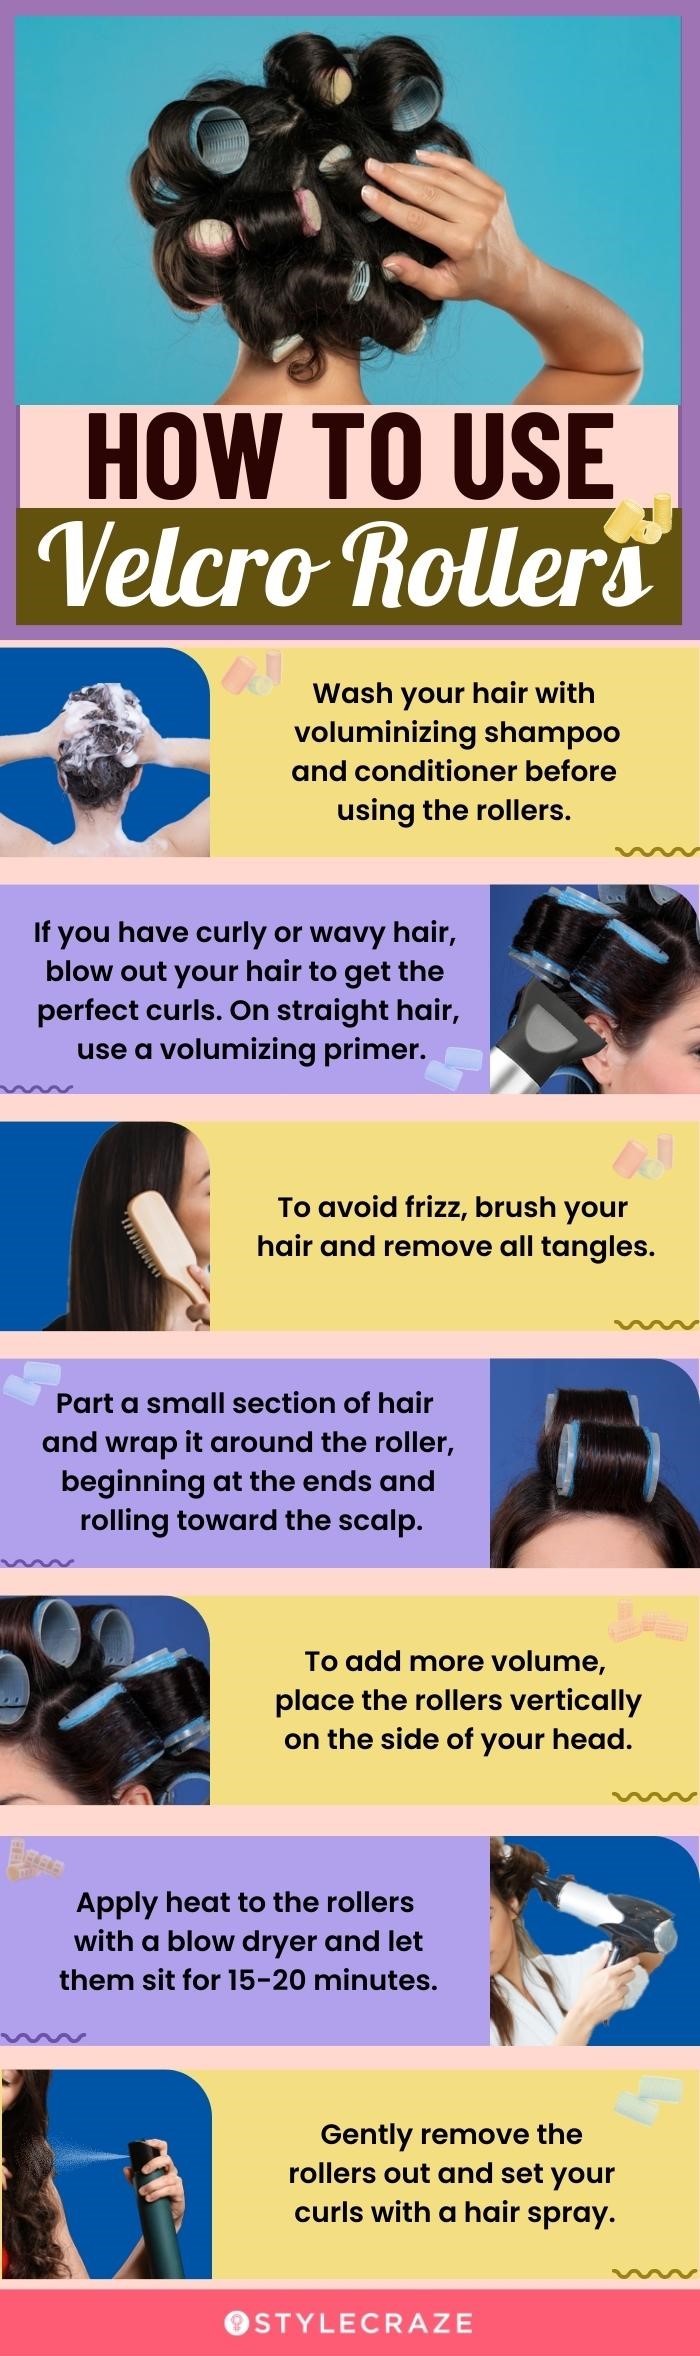 How To Use Velcro Rollers (infographic)